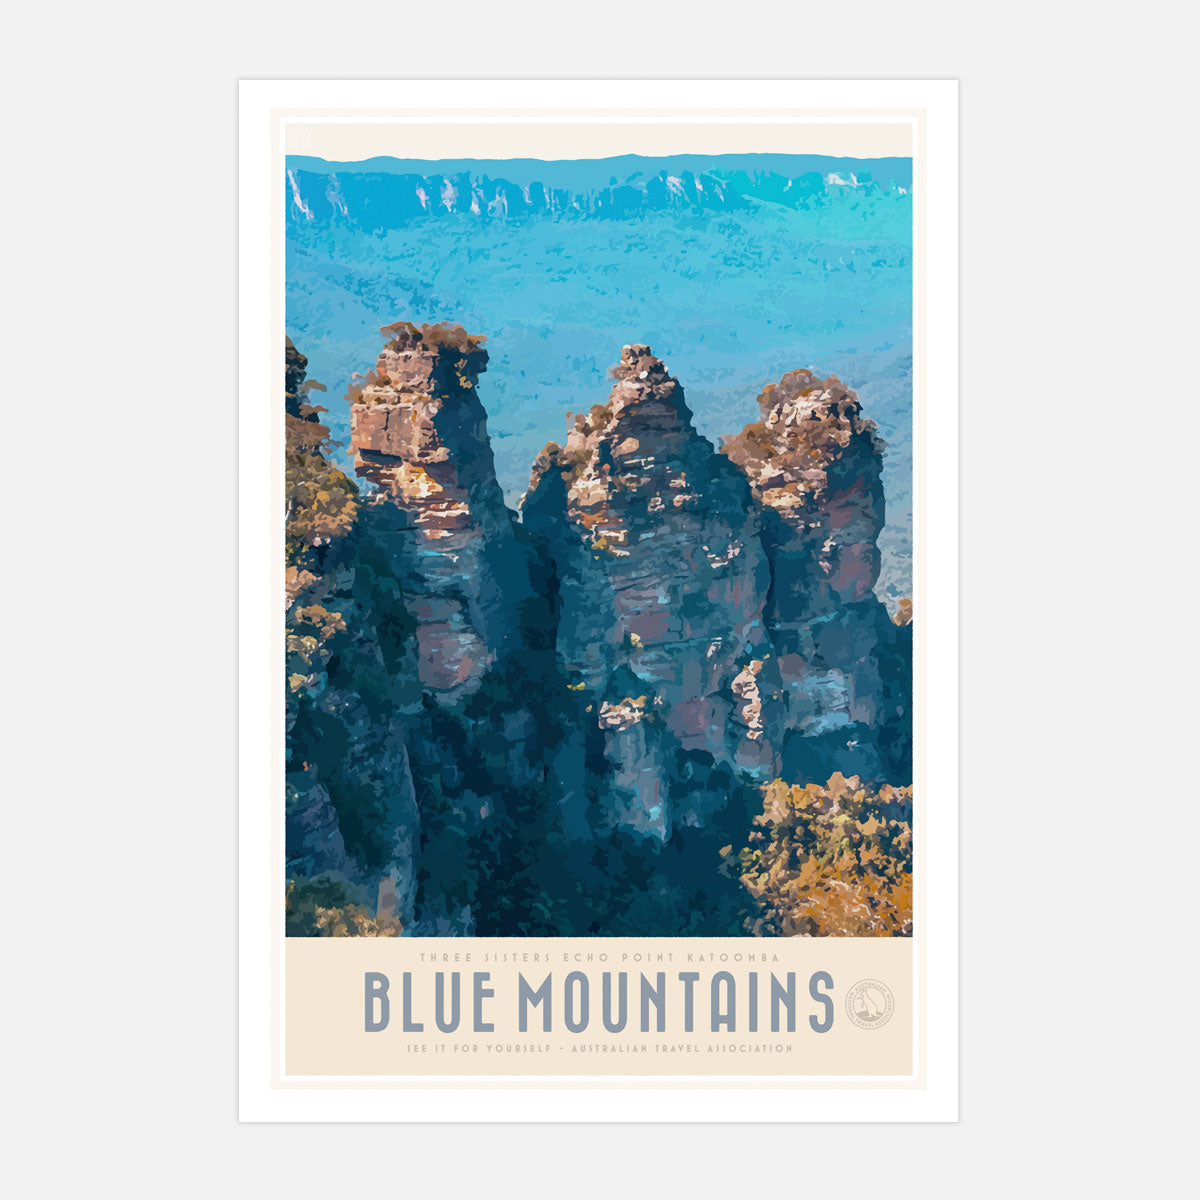 Sydney Blue Mountains vintage retro poster from Places We Luv